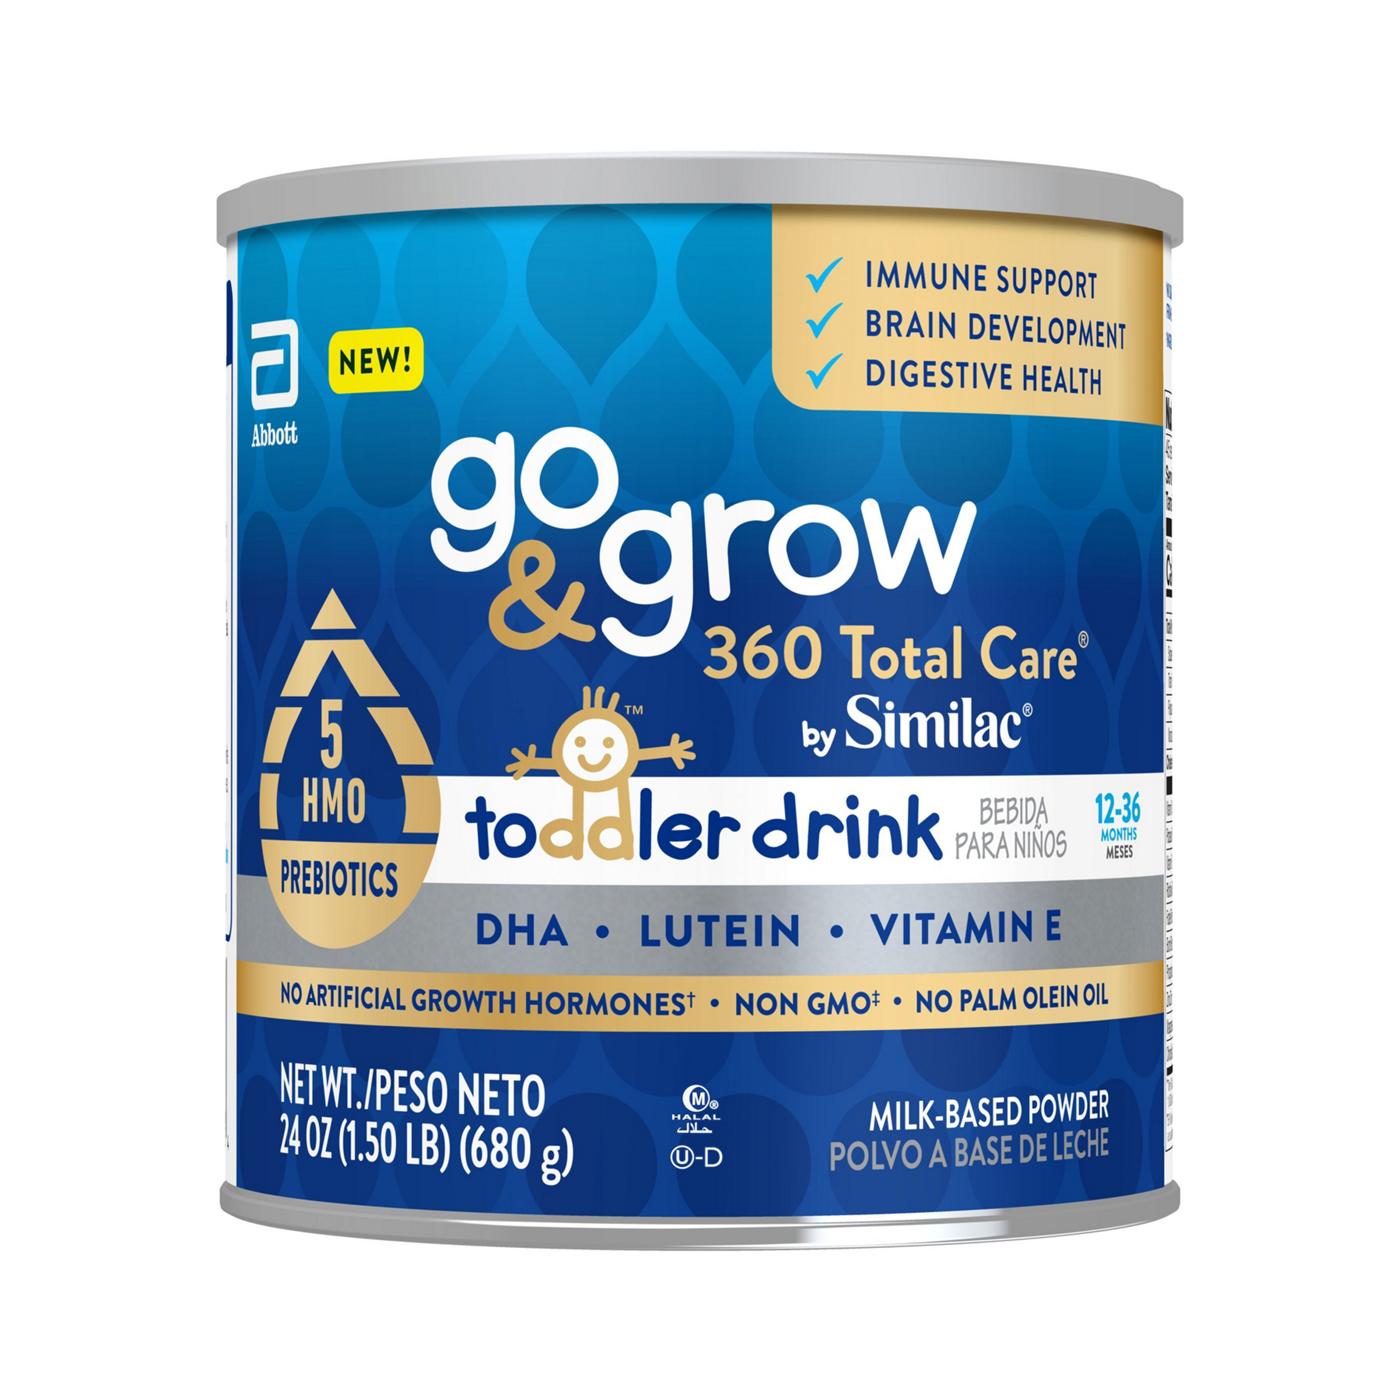 Go & Grow 360 Total Care by Similac Toddler Drink; image 1 of 3